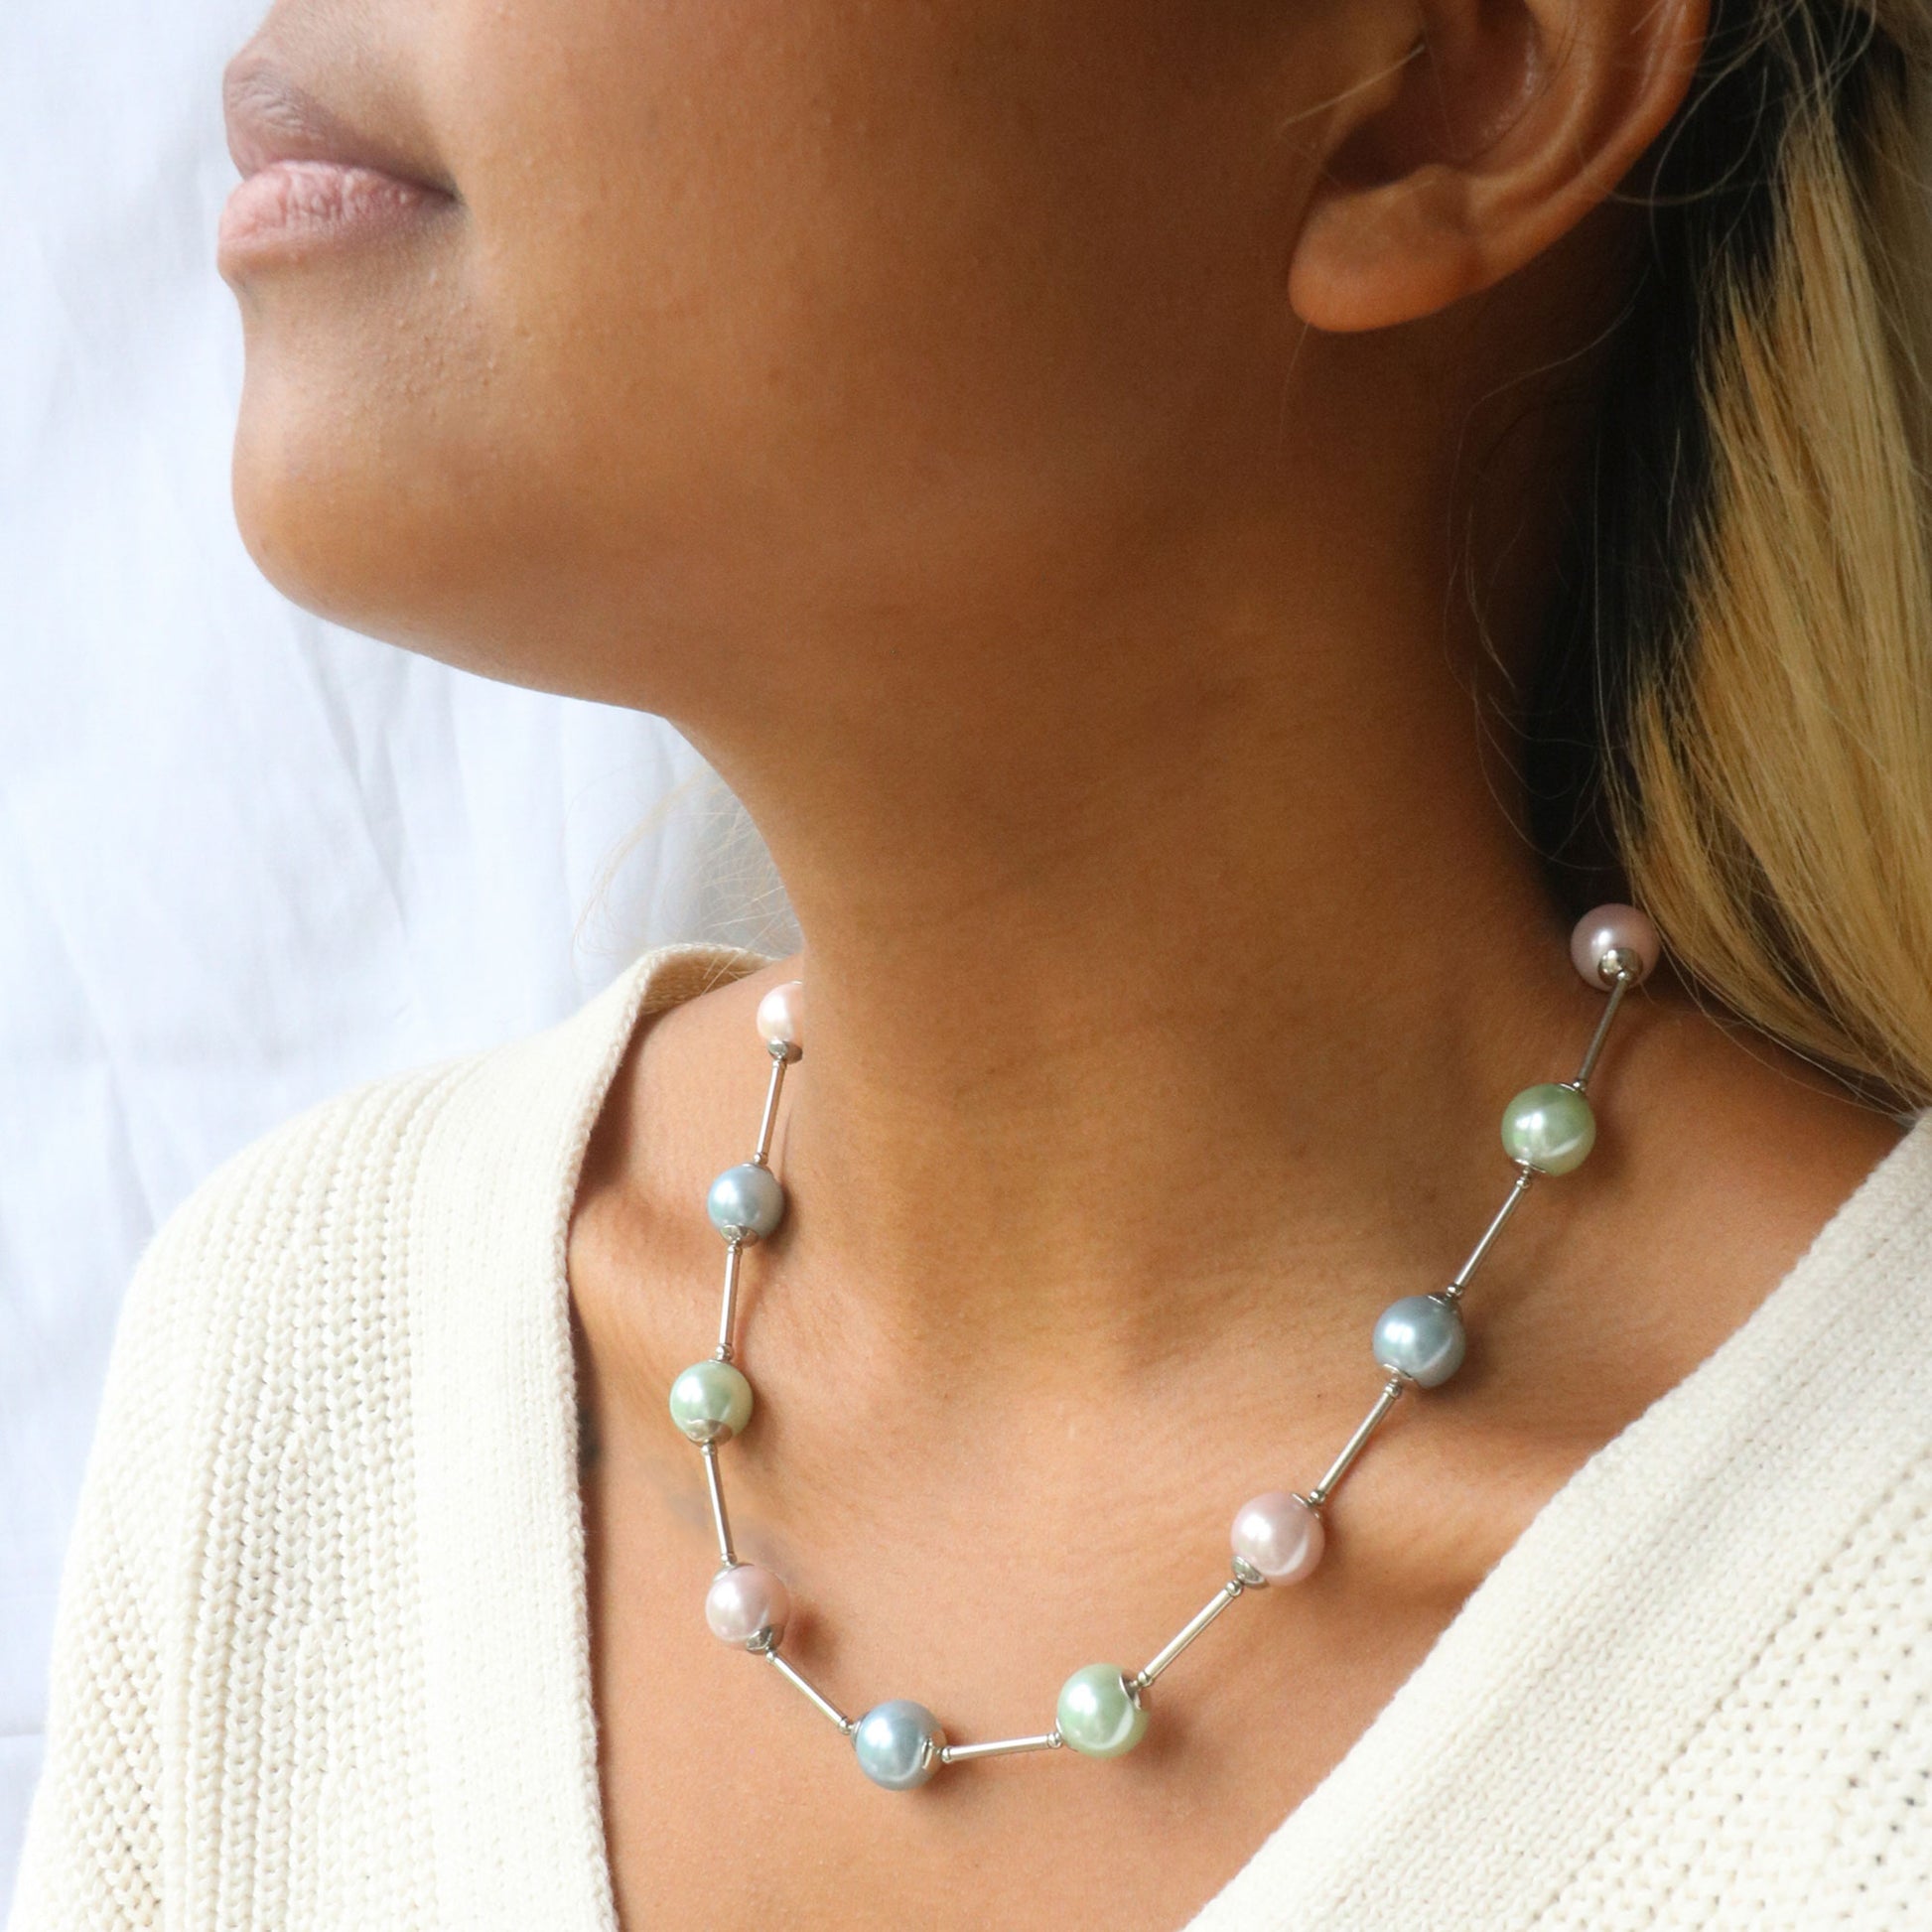 Glass pearl orb-style necklace in pastel shades of blue, pink and green